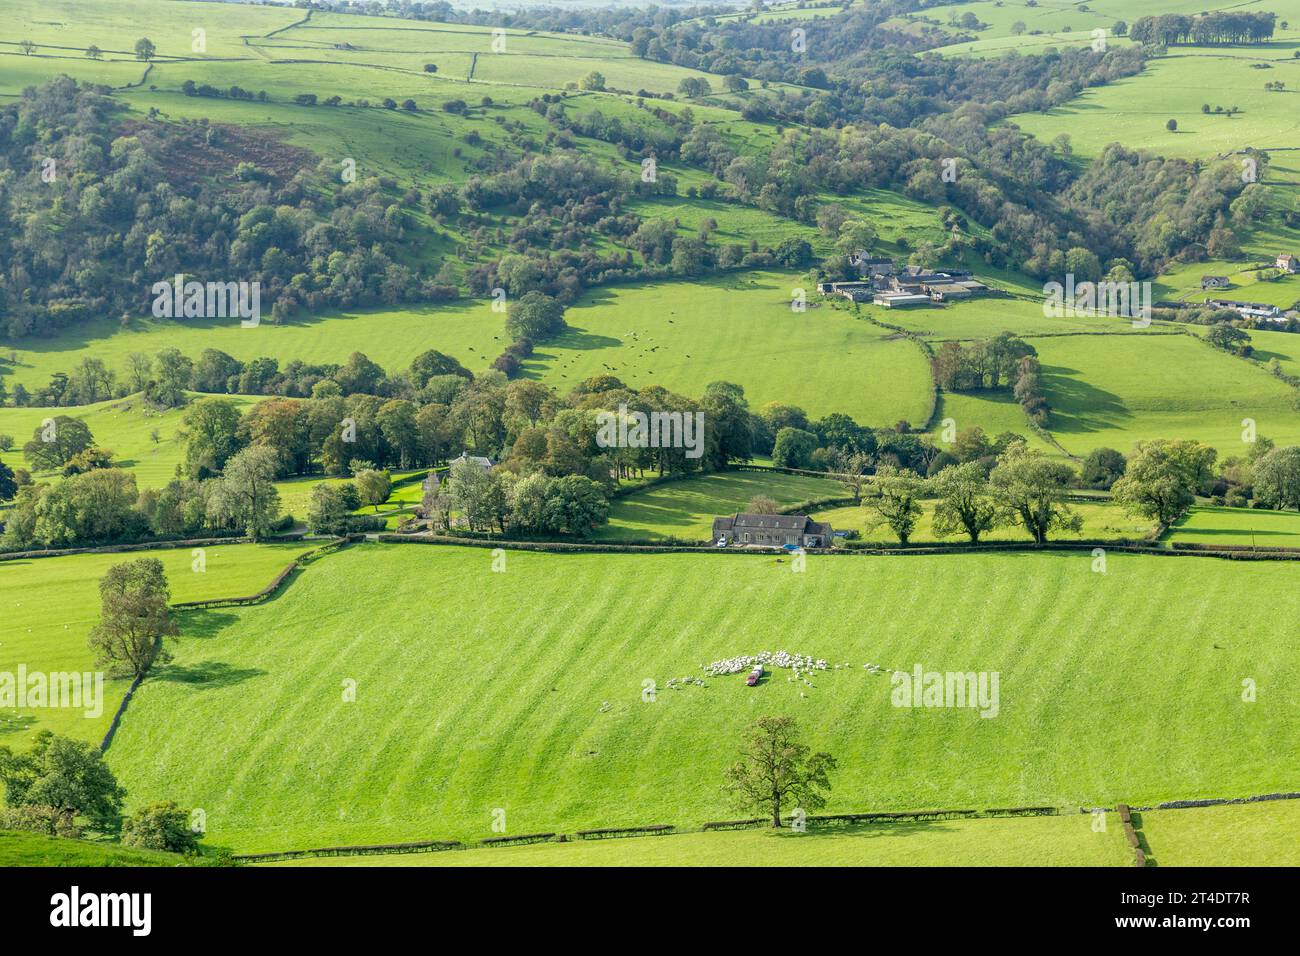 A picturesque patchwork of green fields near Ilam, viewed from Bunster Hill, Staffordshire, England Stock Photo